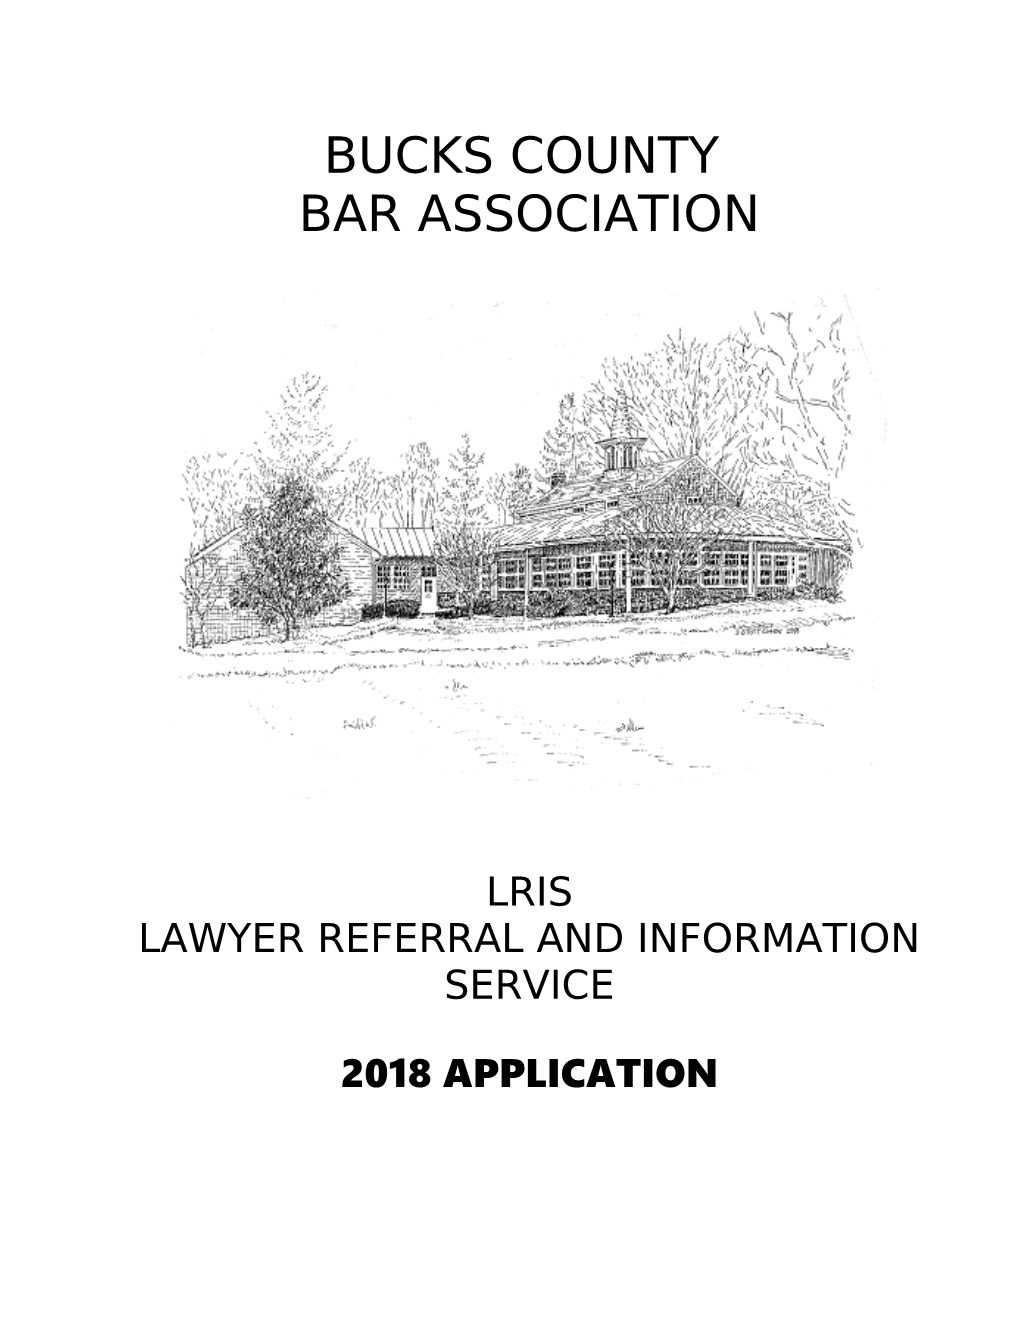 The Bucks County Bar Association Lawyer Referral and Information Service